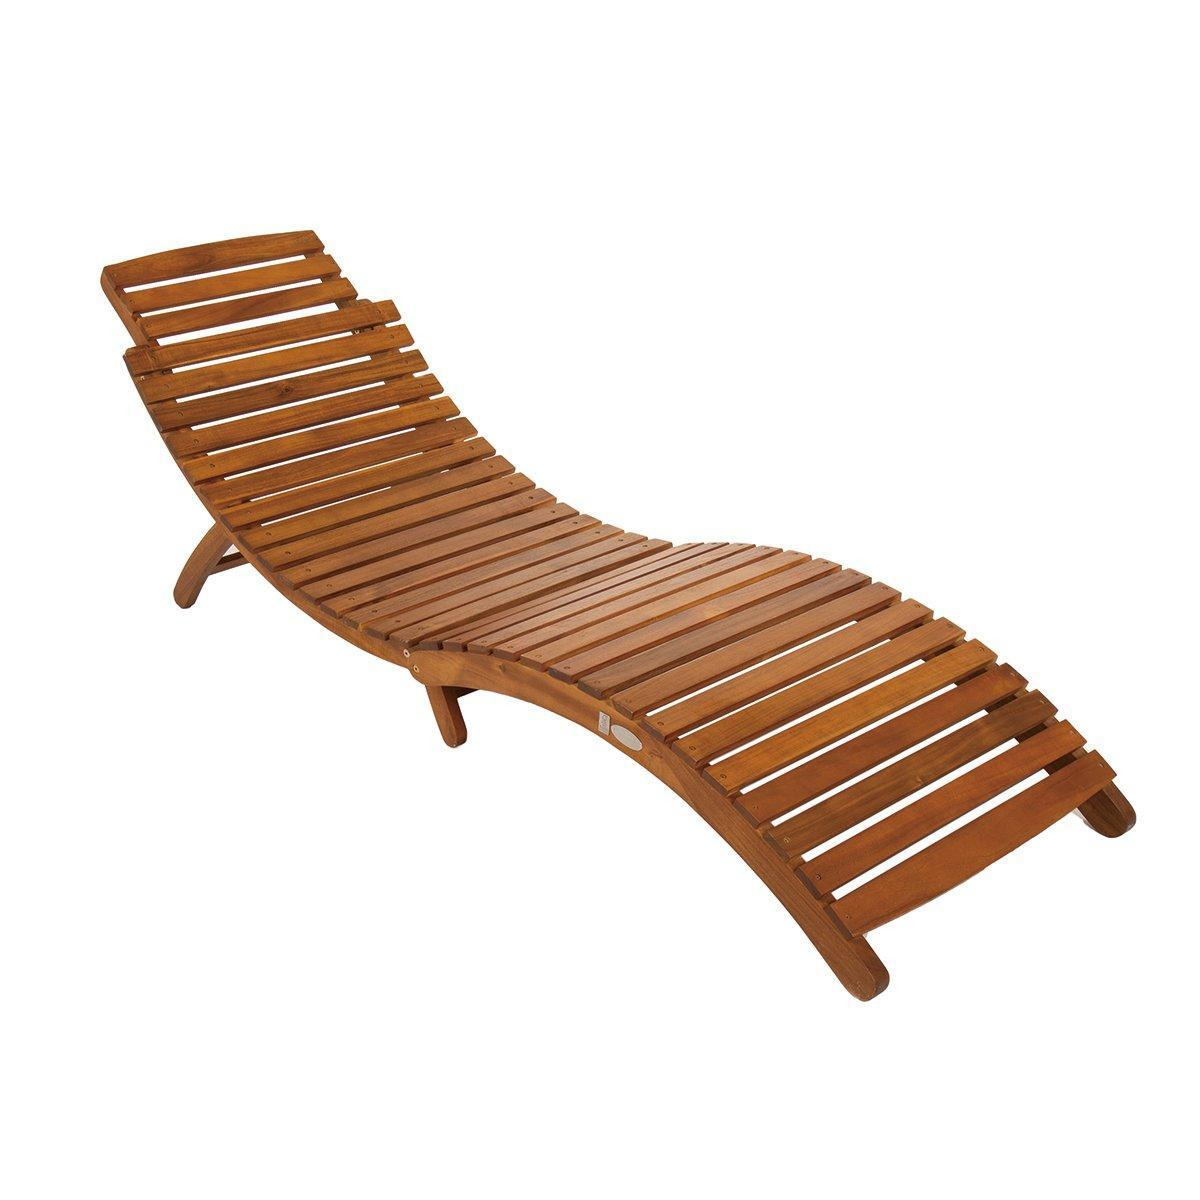 Large Folding Curved Reclining Wood Sun Lounger Patio Sunbed - image 1